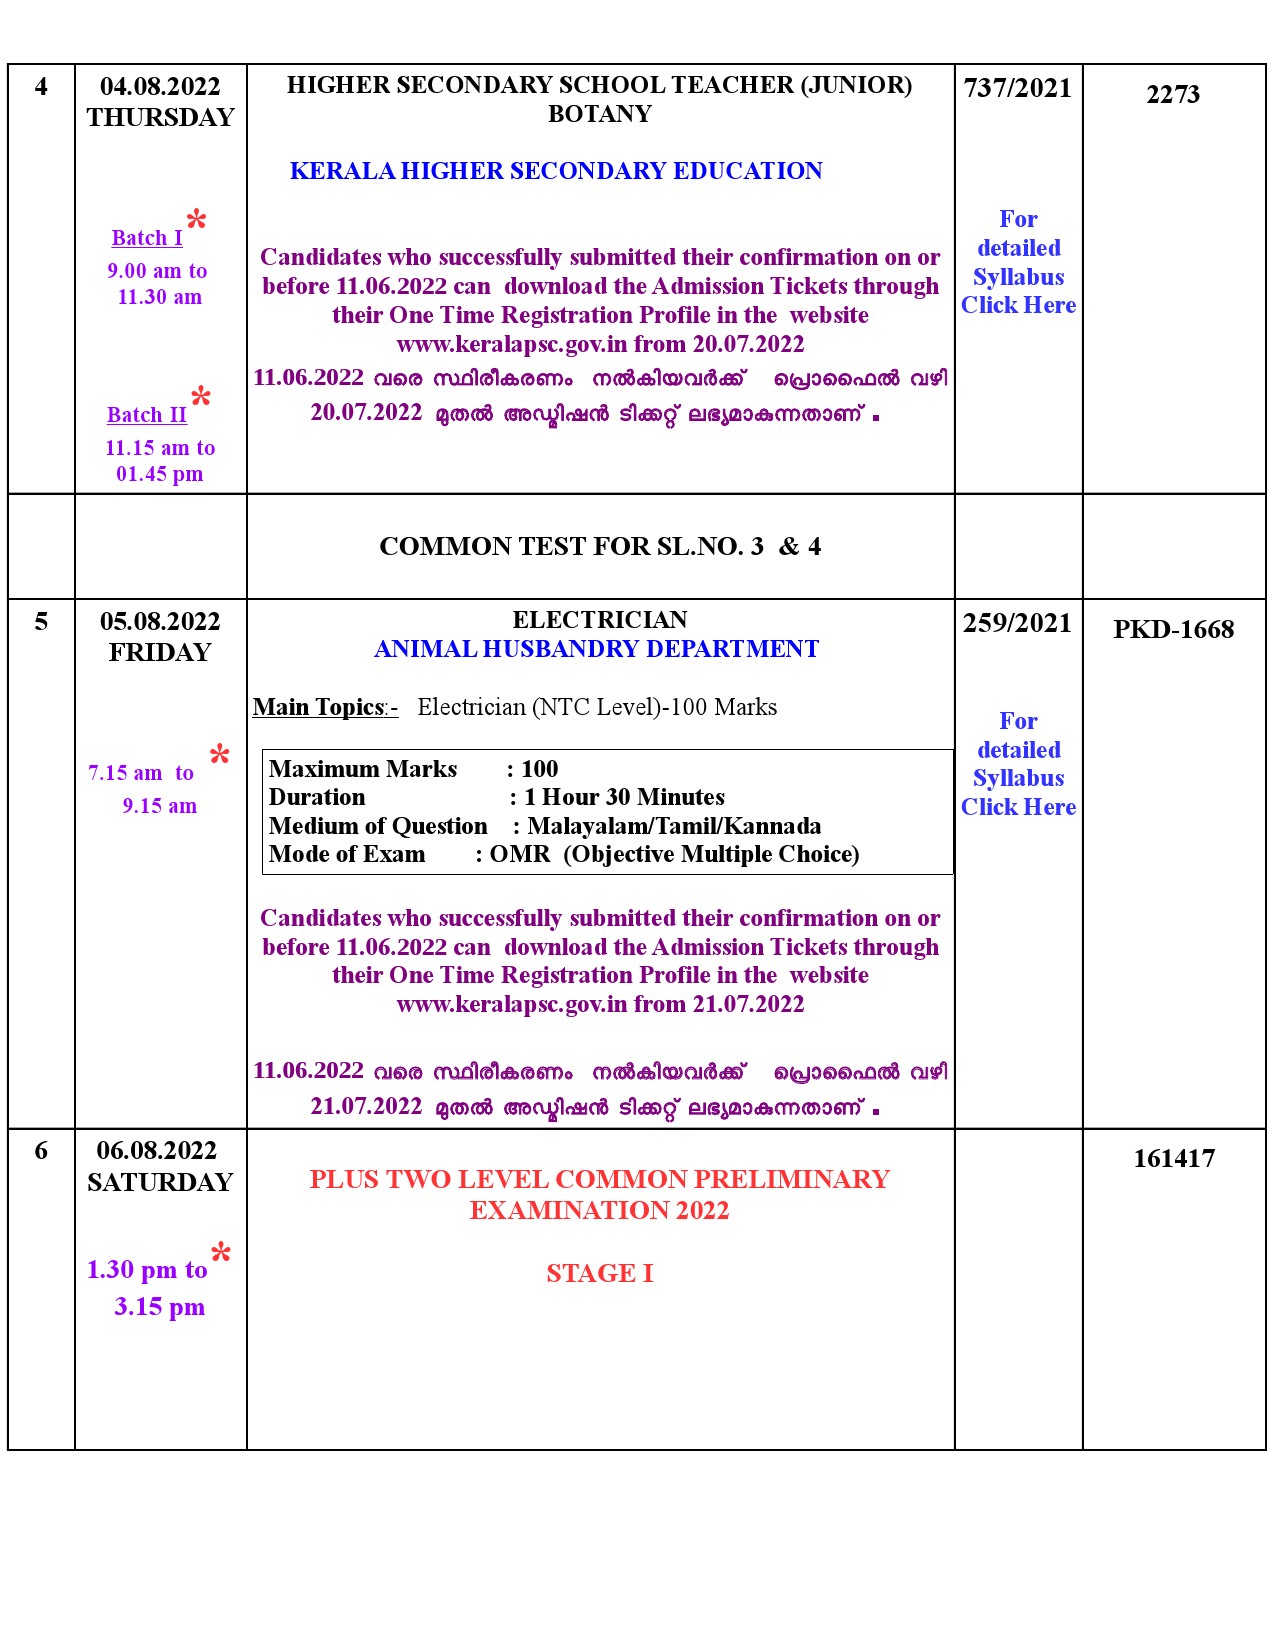 Examination Programme For The Month Of August 2022 - Notification Image 3